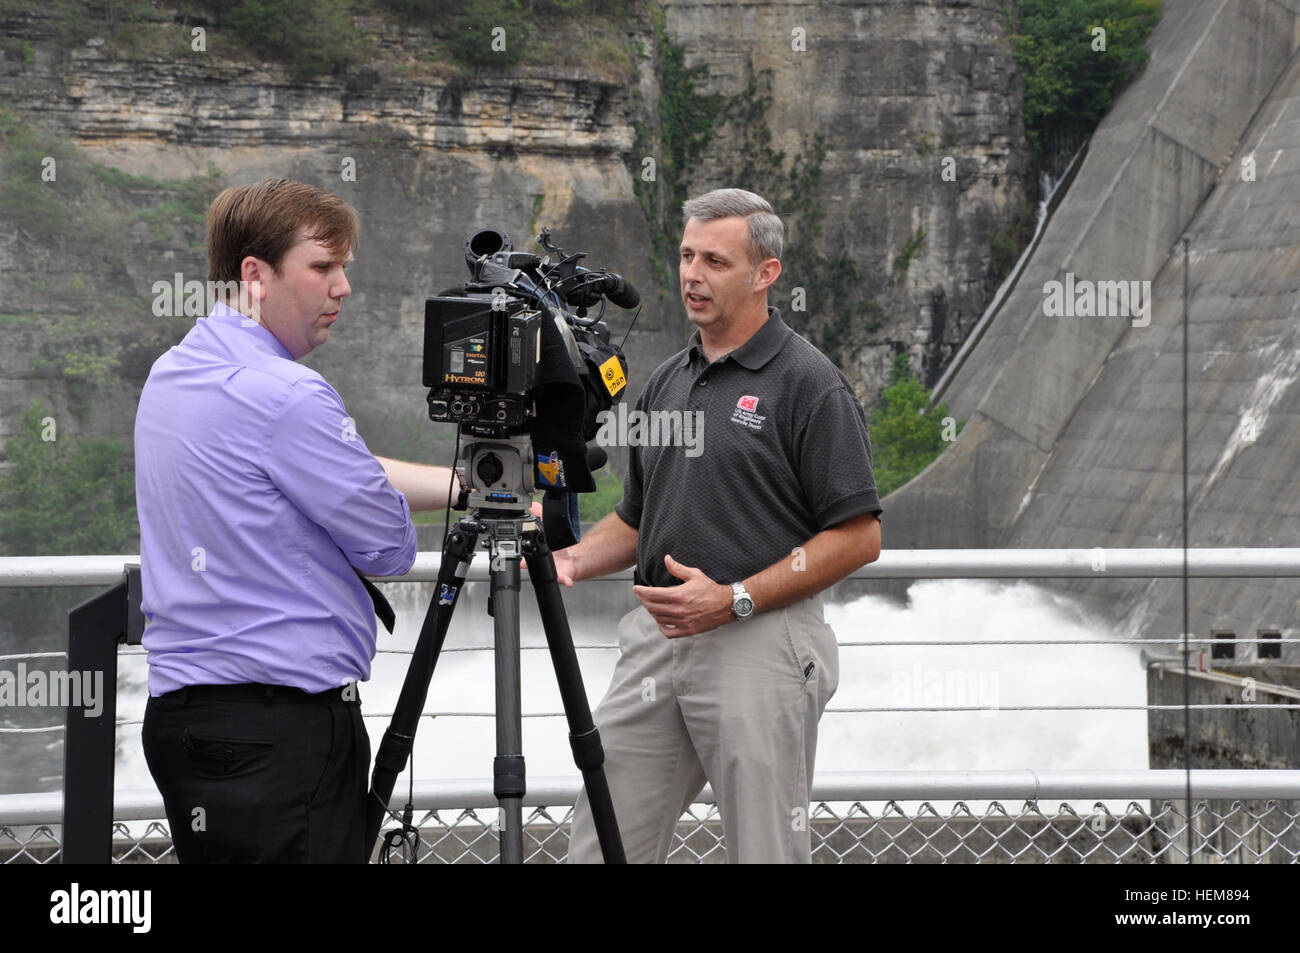 Tim Dunn, right, operations project manager for the mid-Cumberland area, U.S. Army Corps of Engineers Nashville District, explains why the Corps is having guided tours of the Center Hill Lake power plant during an interview with NBC News Channel 4 reporter and videographer Forrest Sanders July 21, 2012. Center Hill Lake open house, power plant tours draw young, elderly visitors 120721-A-HL948-004 Stock Photo